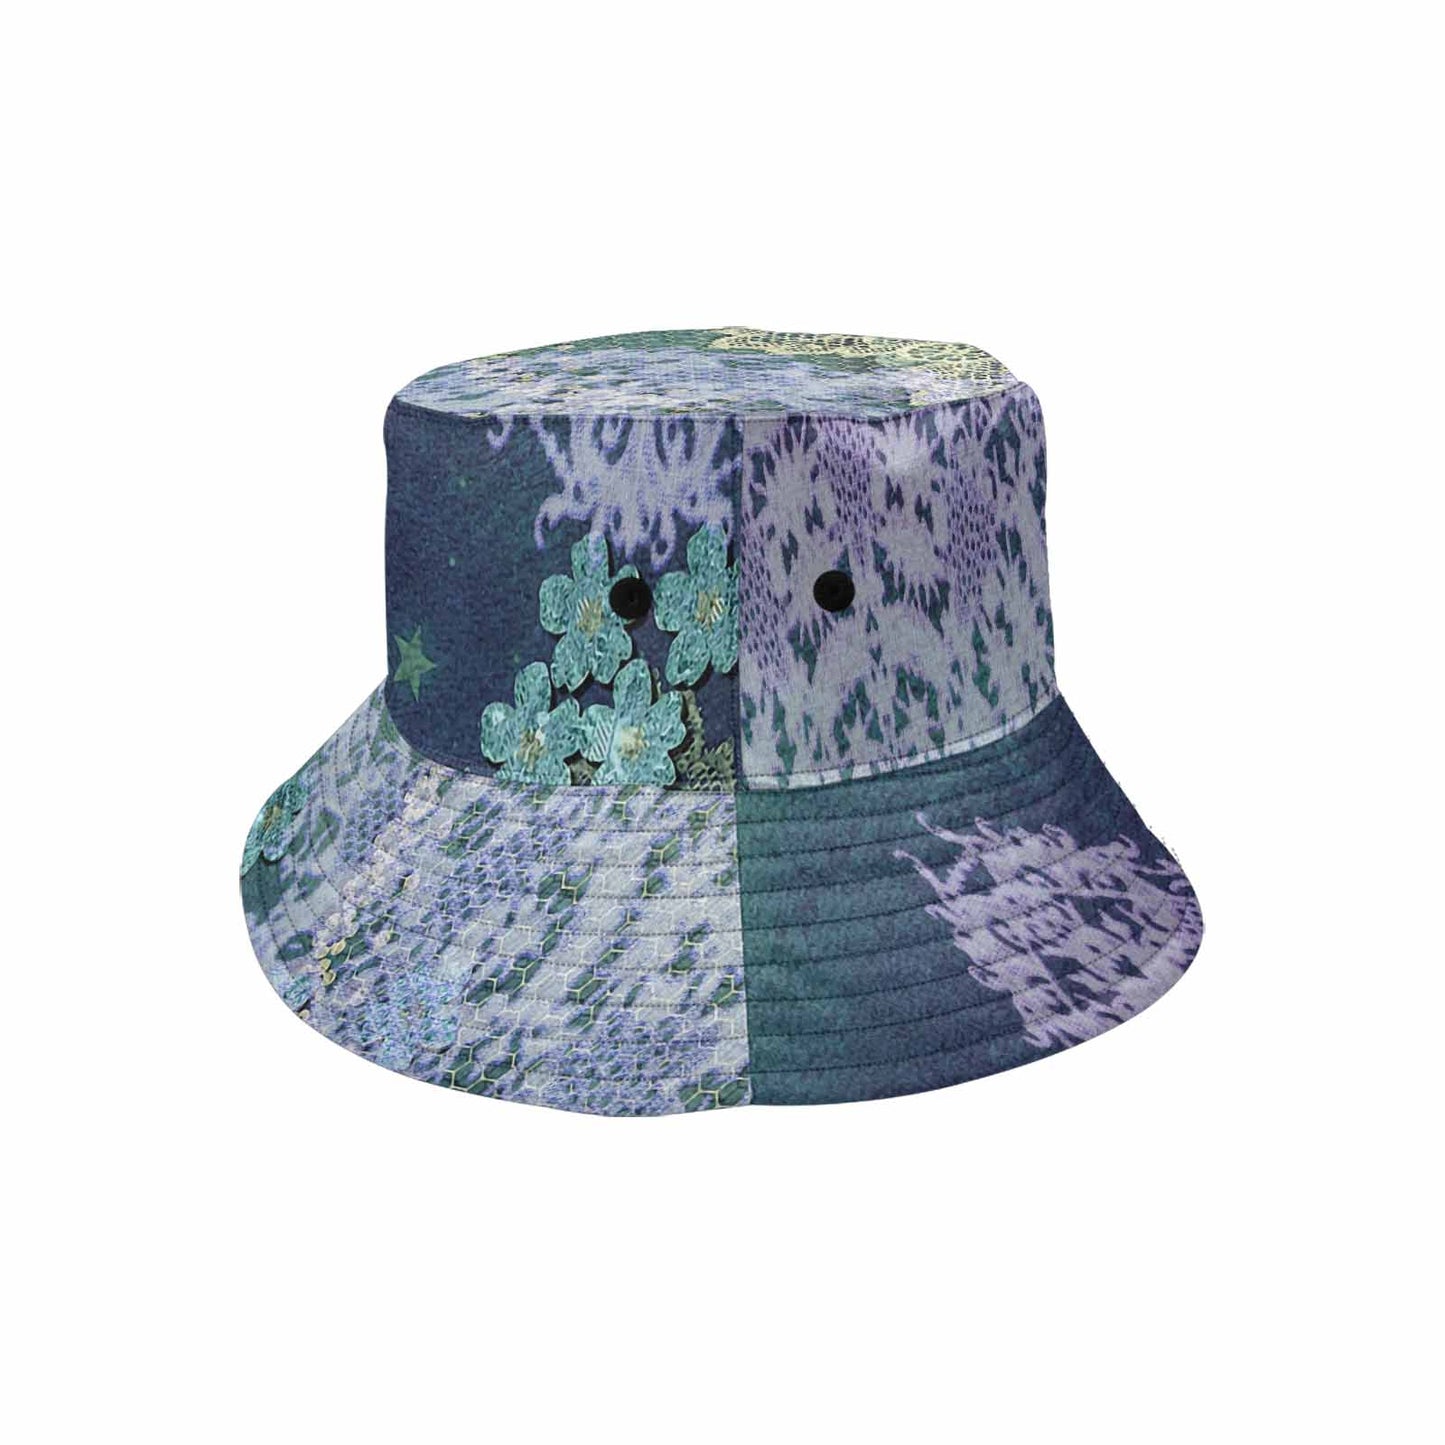 Victorian lace Bucket Hat, outdoors hat, design 05